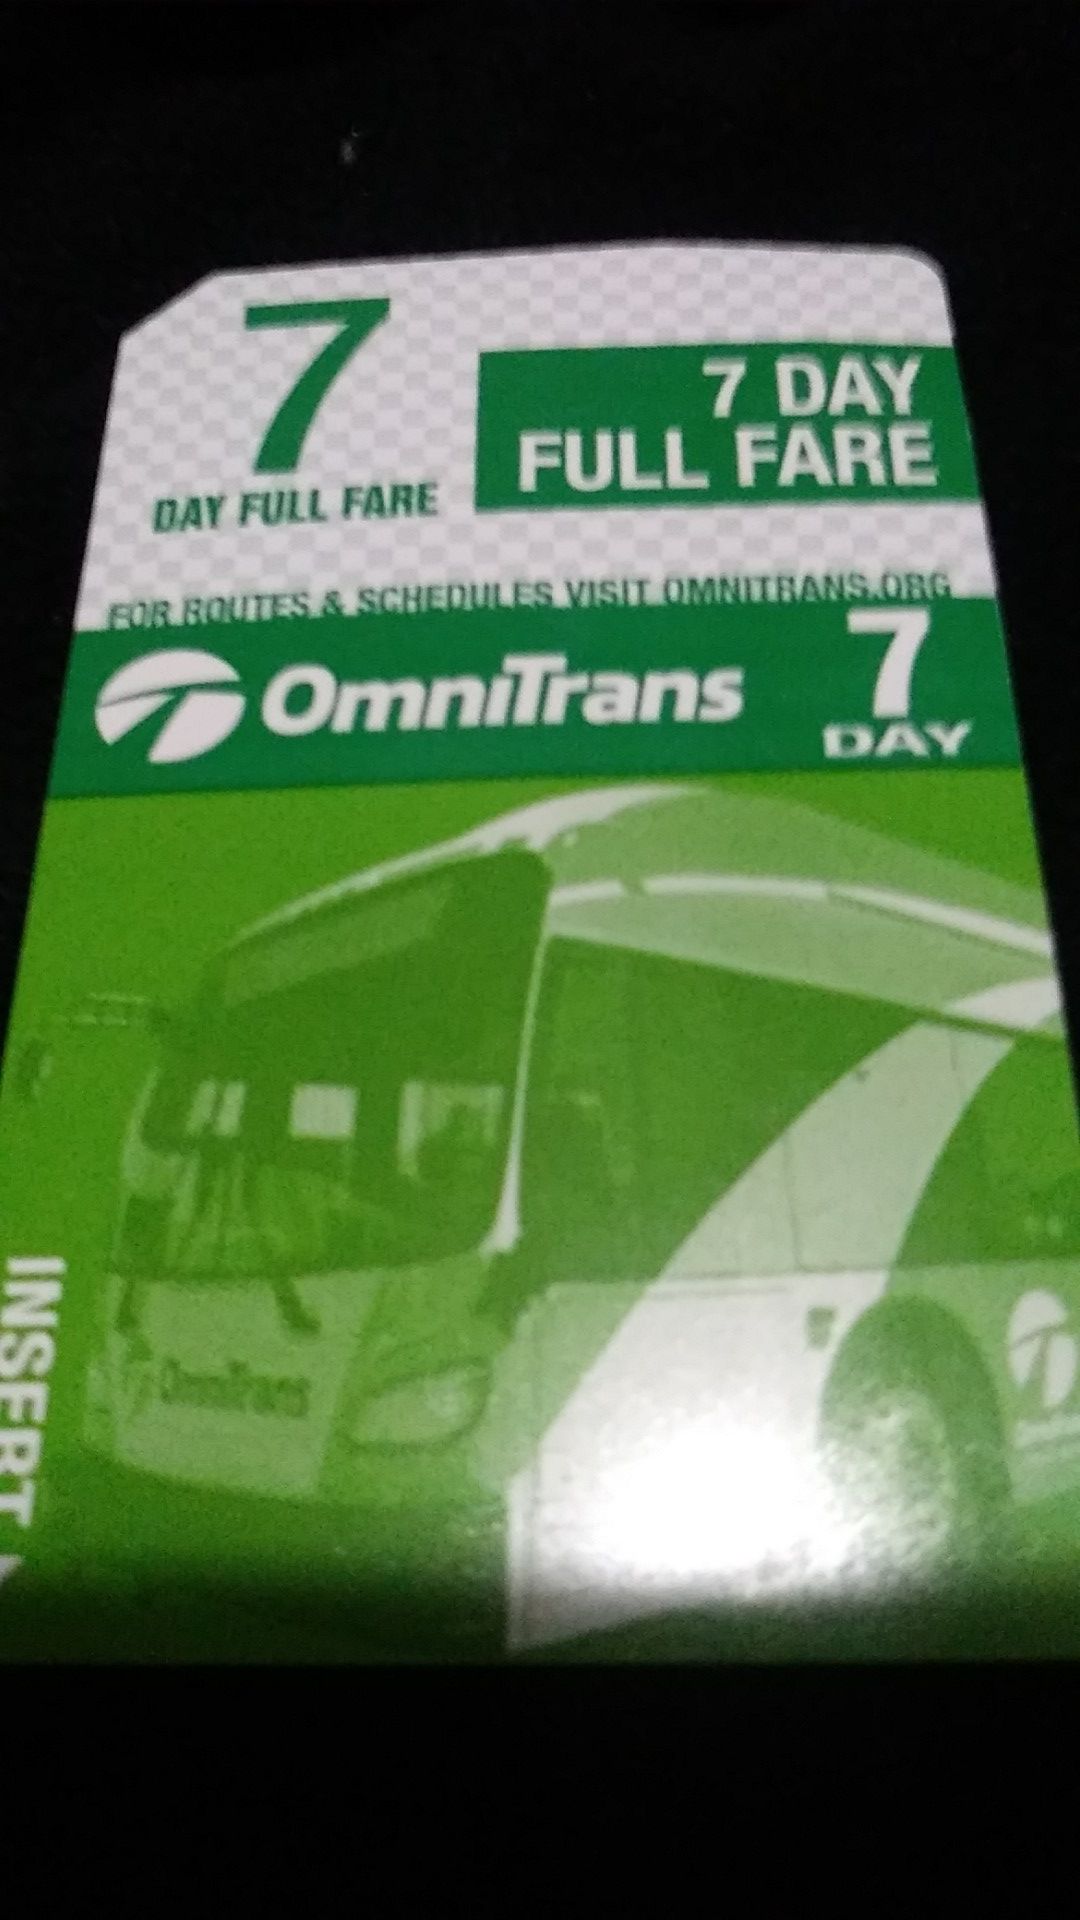 Full fare 7 day bus pass